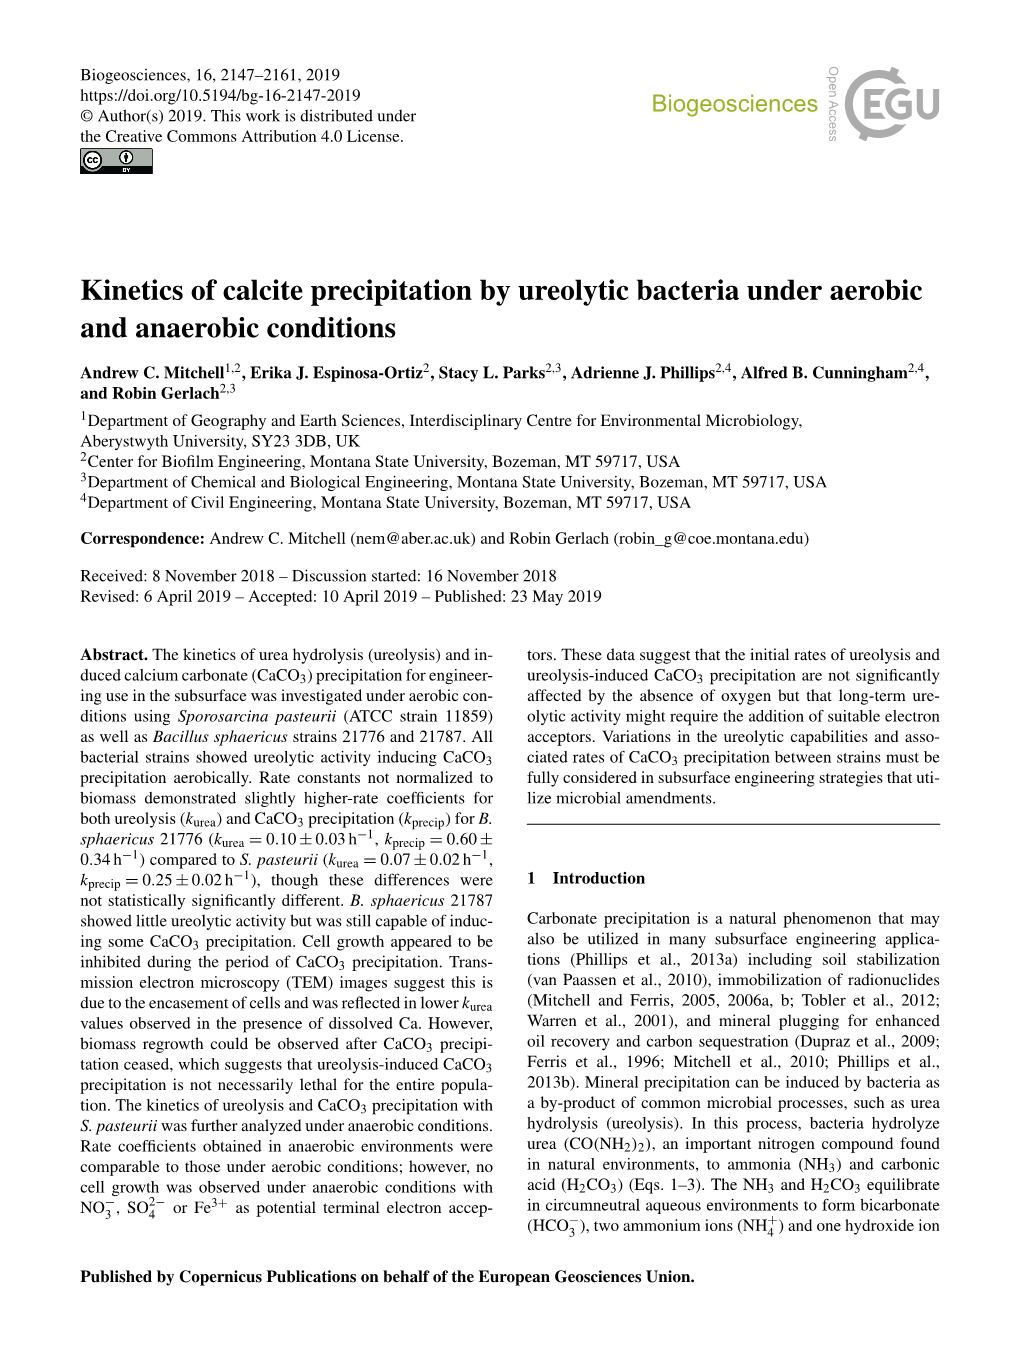 Kinetics of Calcite Precipitation by Ureolytic Bacteria Under Aerobic and Anaerobic Conditions